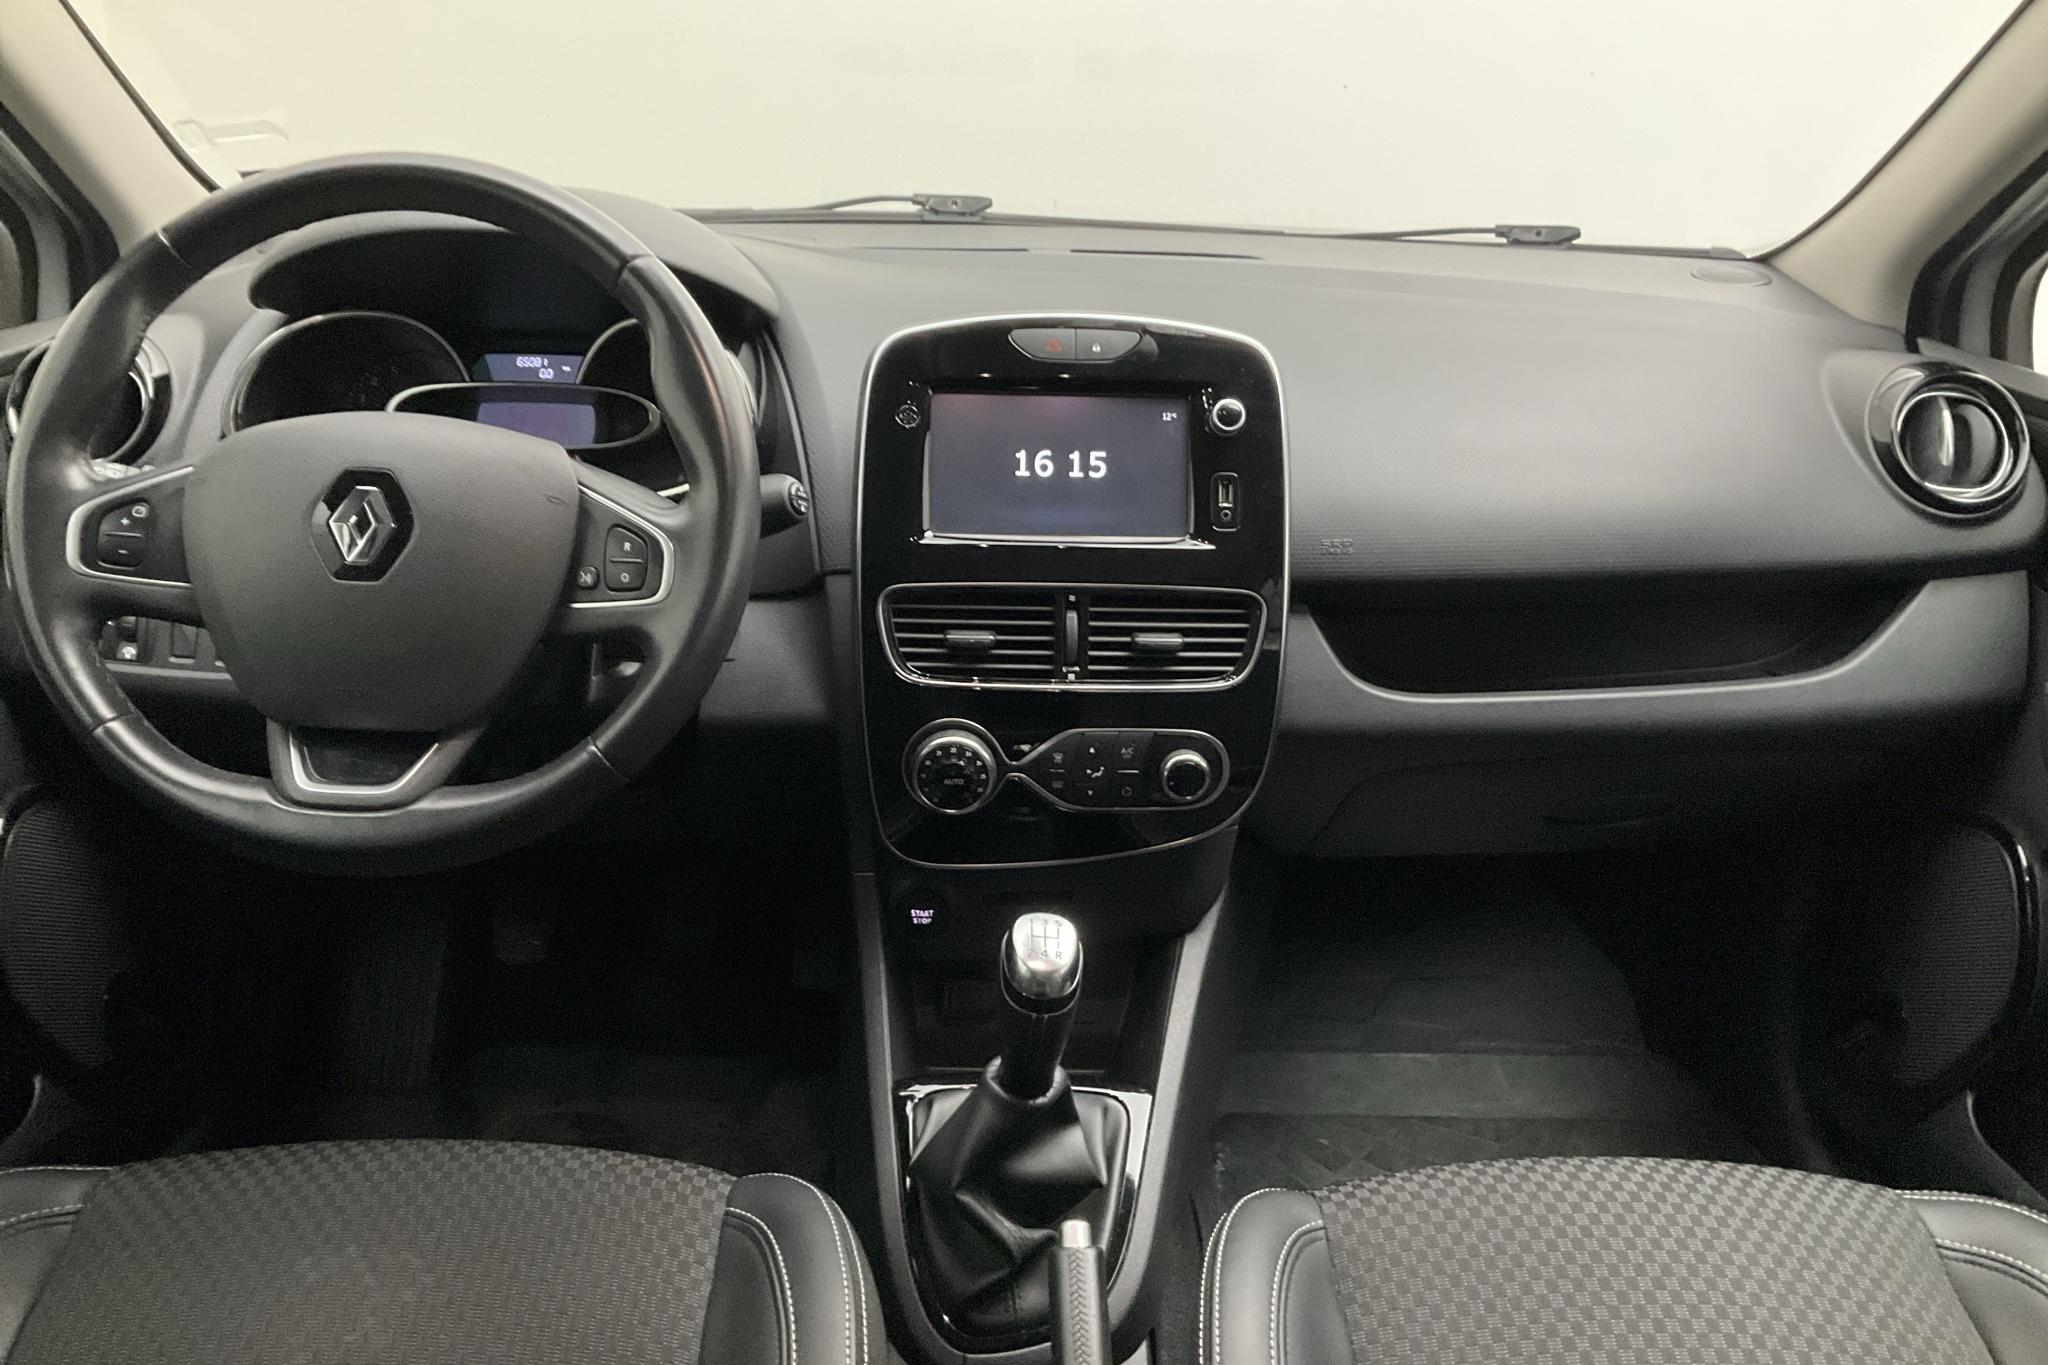 Renault Clio IV 0.9 TCe 90 5dr (90hk) - 65 080 km - Manual - silver - 2018